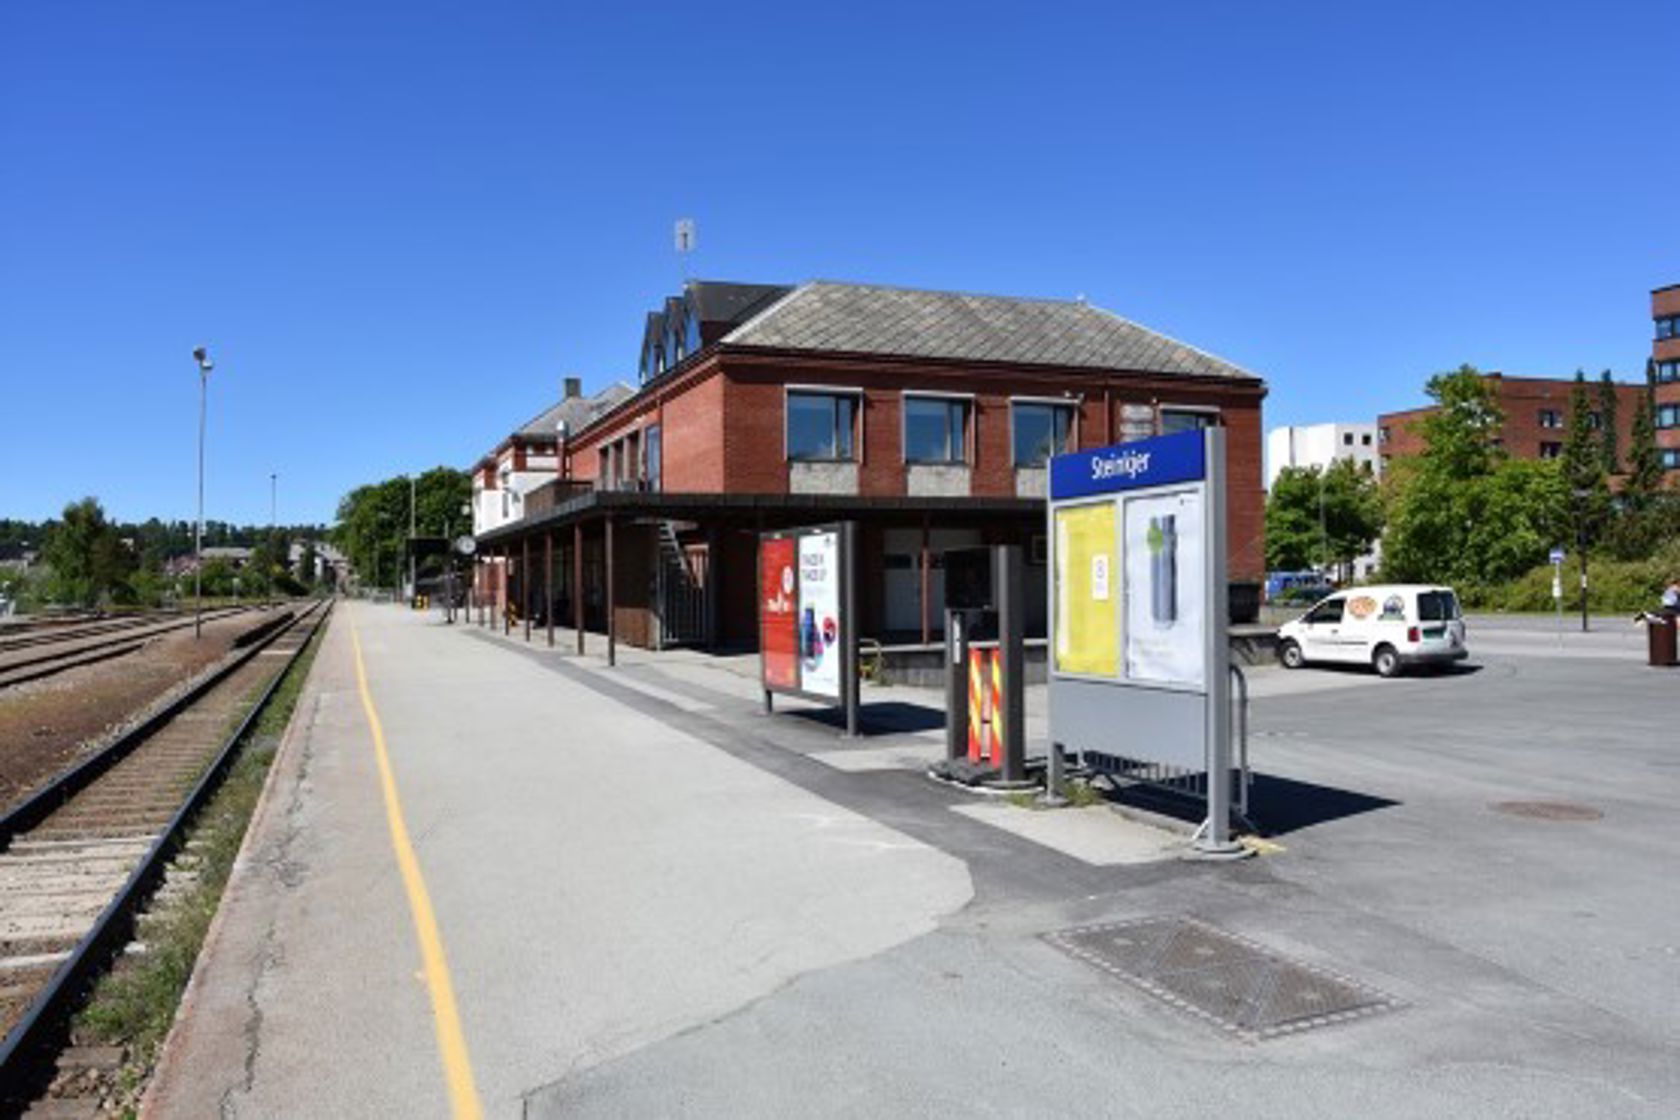 Exterior view of Steinkjer station